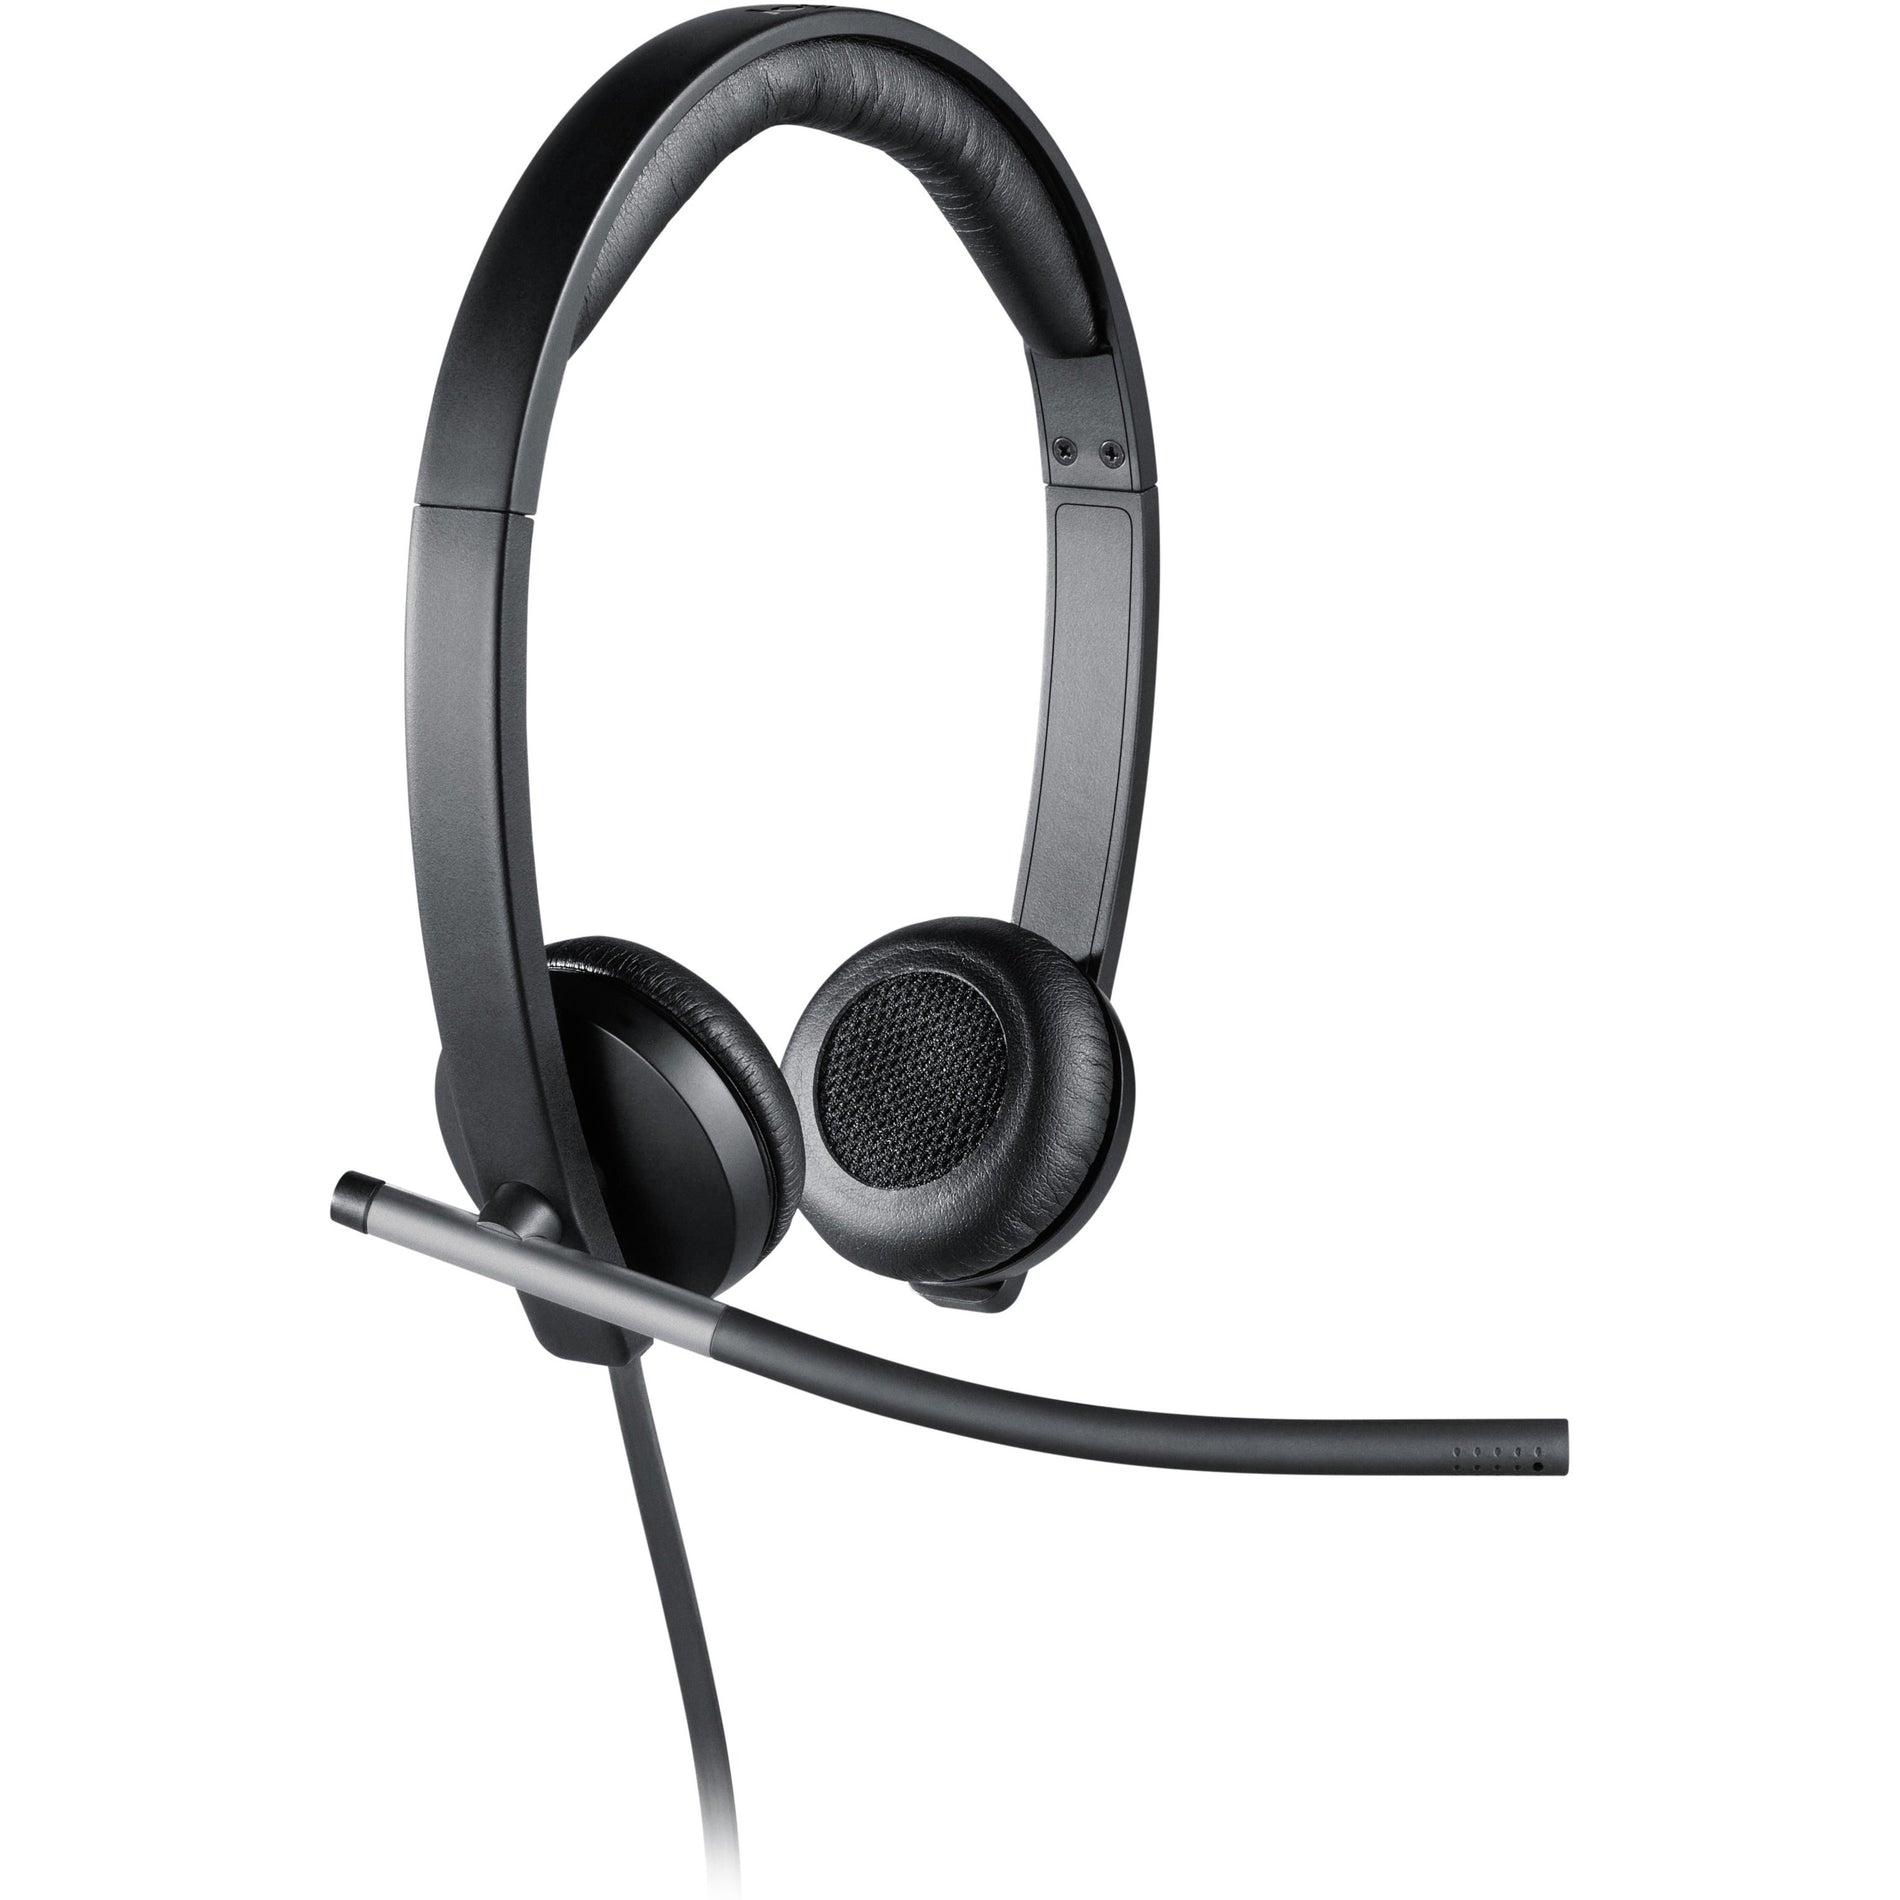 Logitech 981-000518 USB Headset Stereo H650e, Over-the-head Binaural Headset with Boom Microphone, Noise Cancelling, 2 Year Warranty